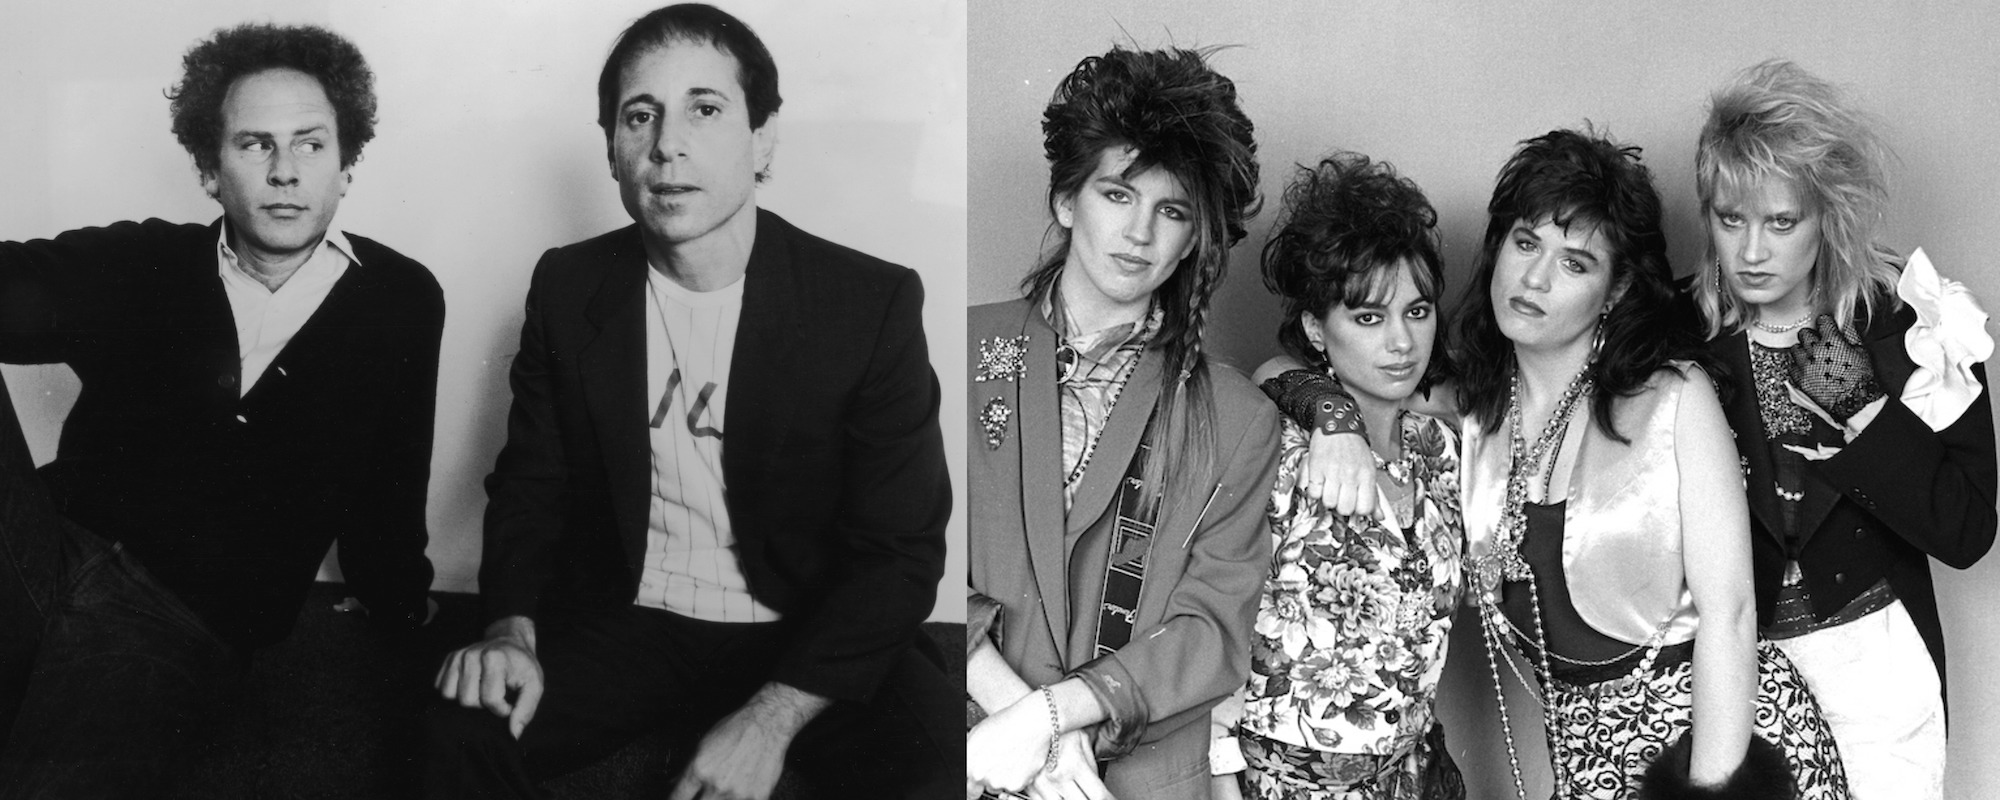 From Simon & Garfunkel to The Bangles: The Evolution of “A Hazy Shade of Winter”